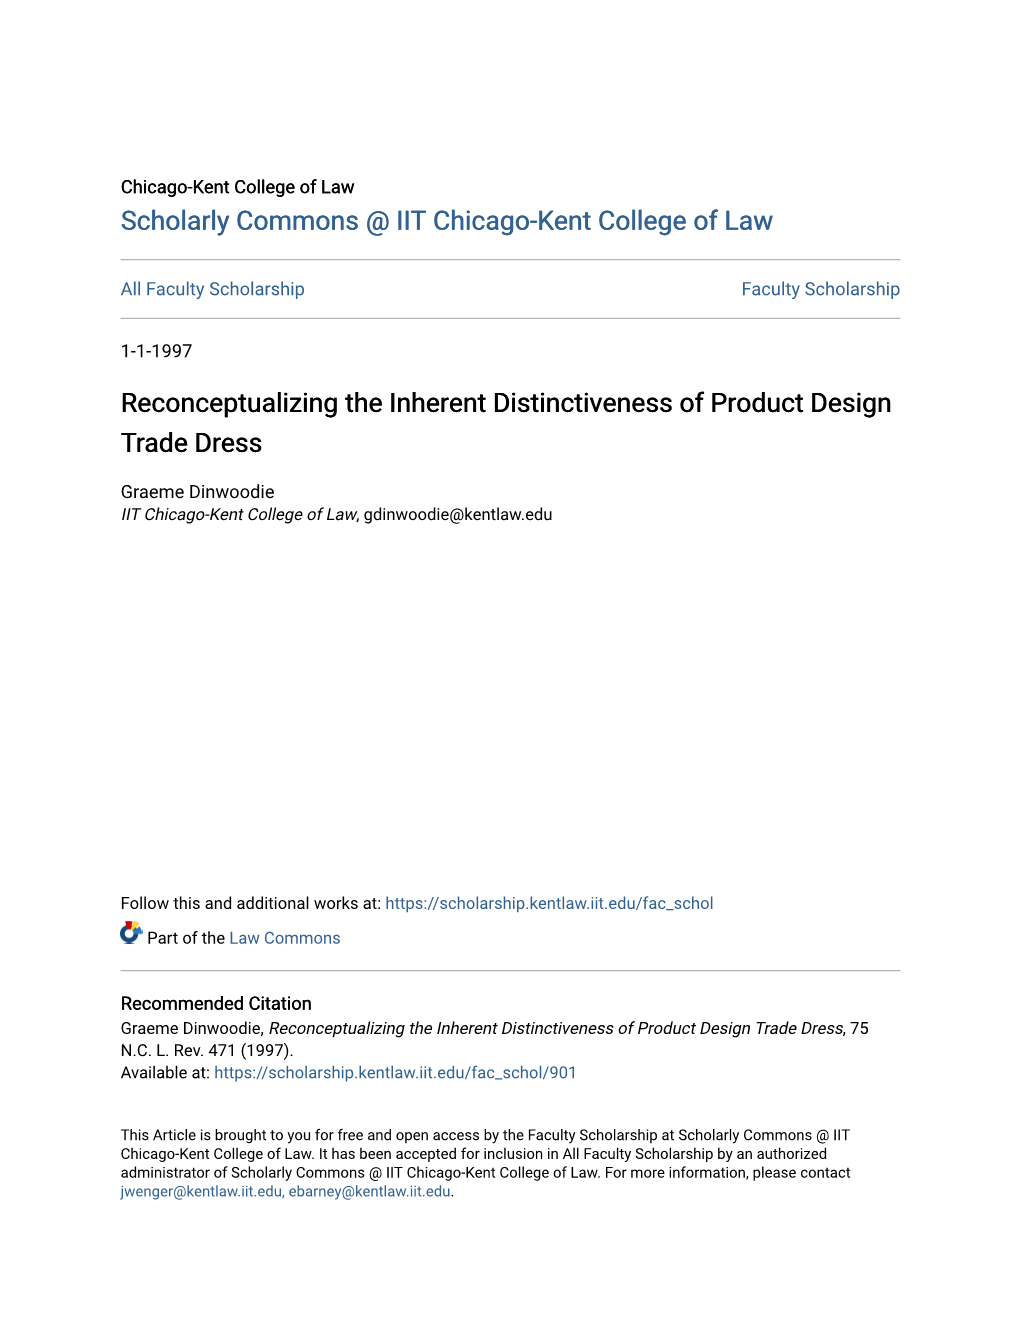 Reconceptualizing the Inherent Distinctiveness of Product Design Trade Dress